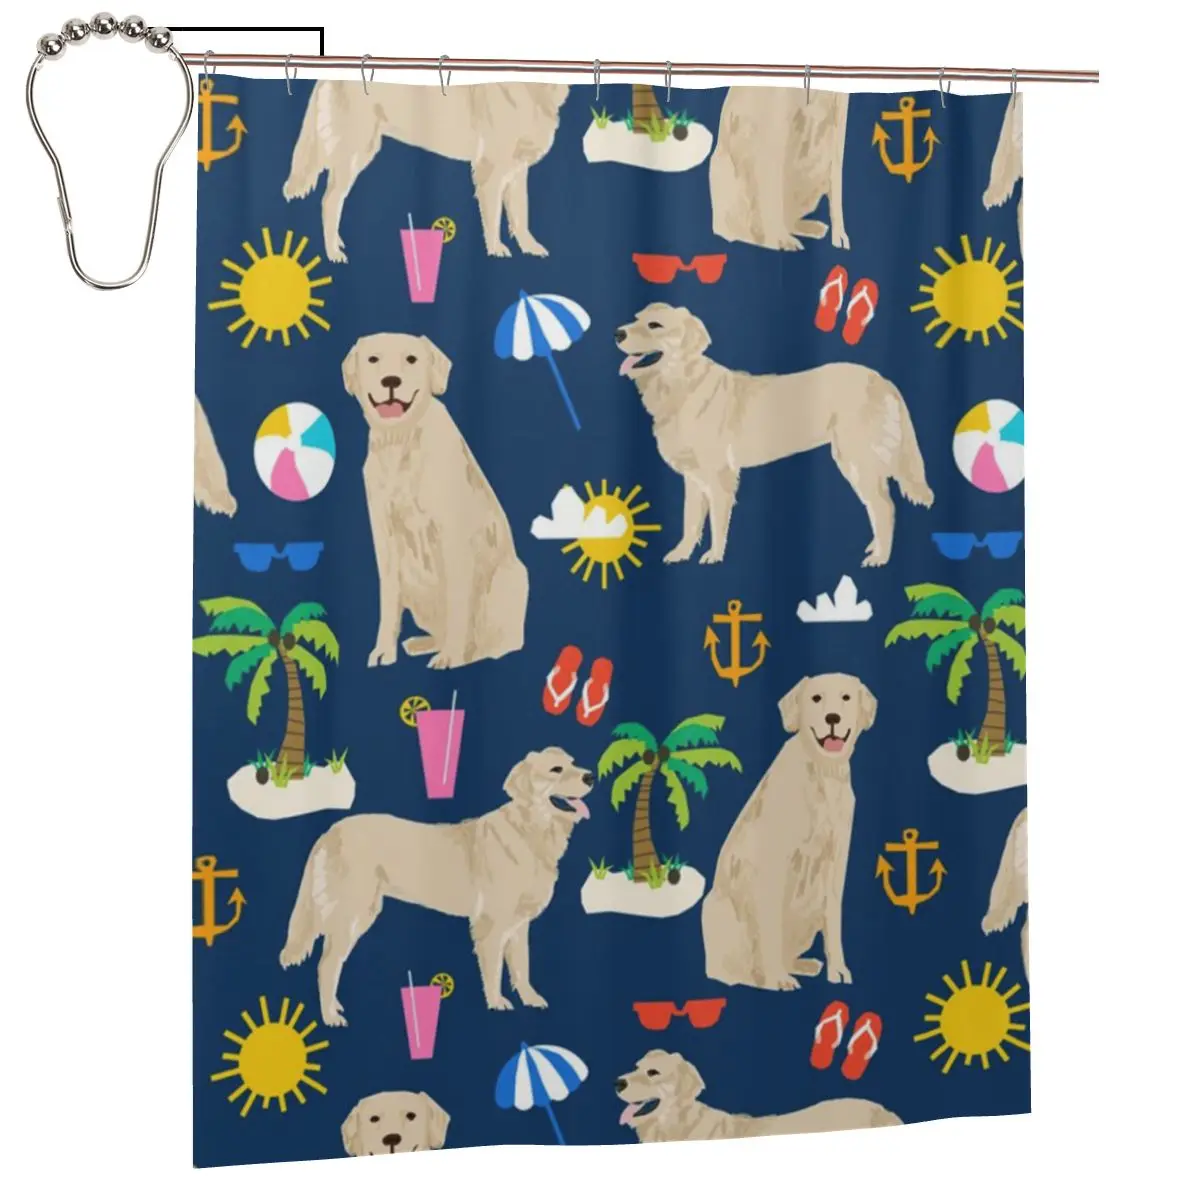 

Golden Retriever Shower Curtain for Bathroon Personalized Funny Bath Curtain Set with Iron Hooks Home Decor Gift 60x72in